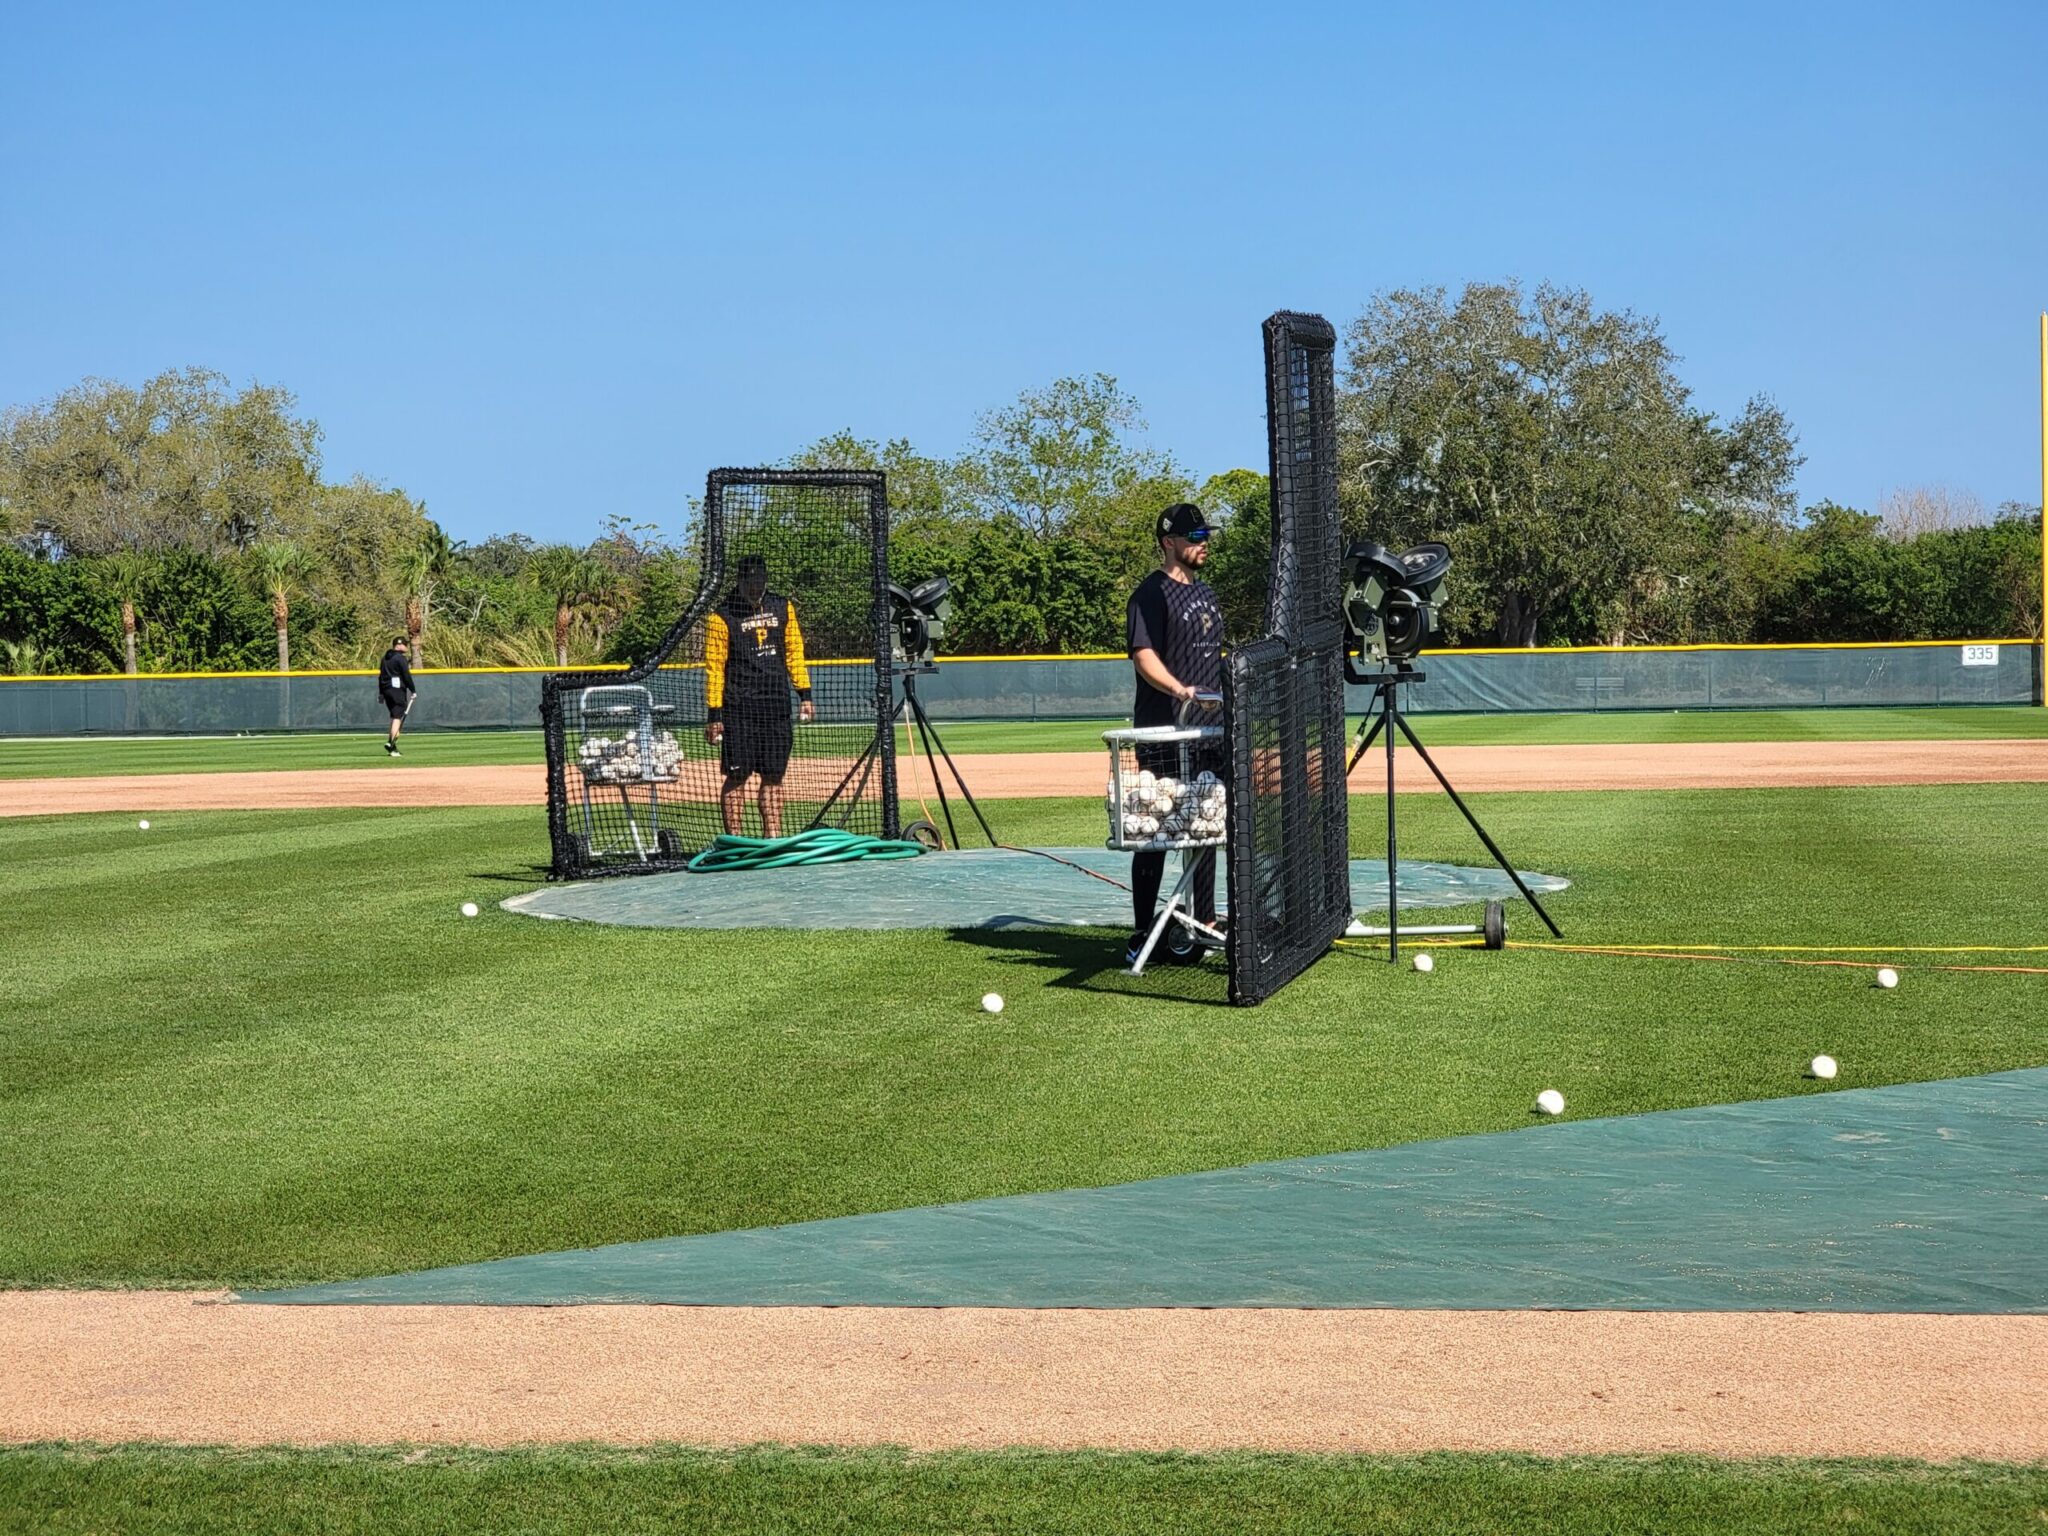 The Pirates Continue Adding Implicit Training Environments to Player Development